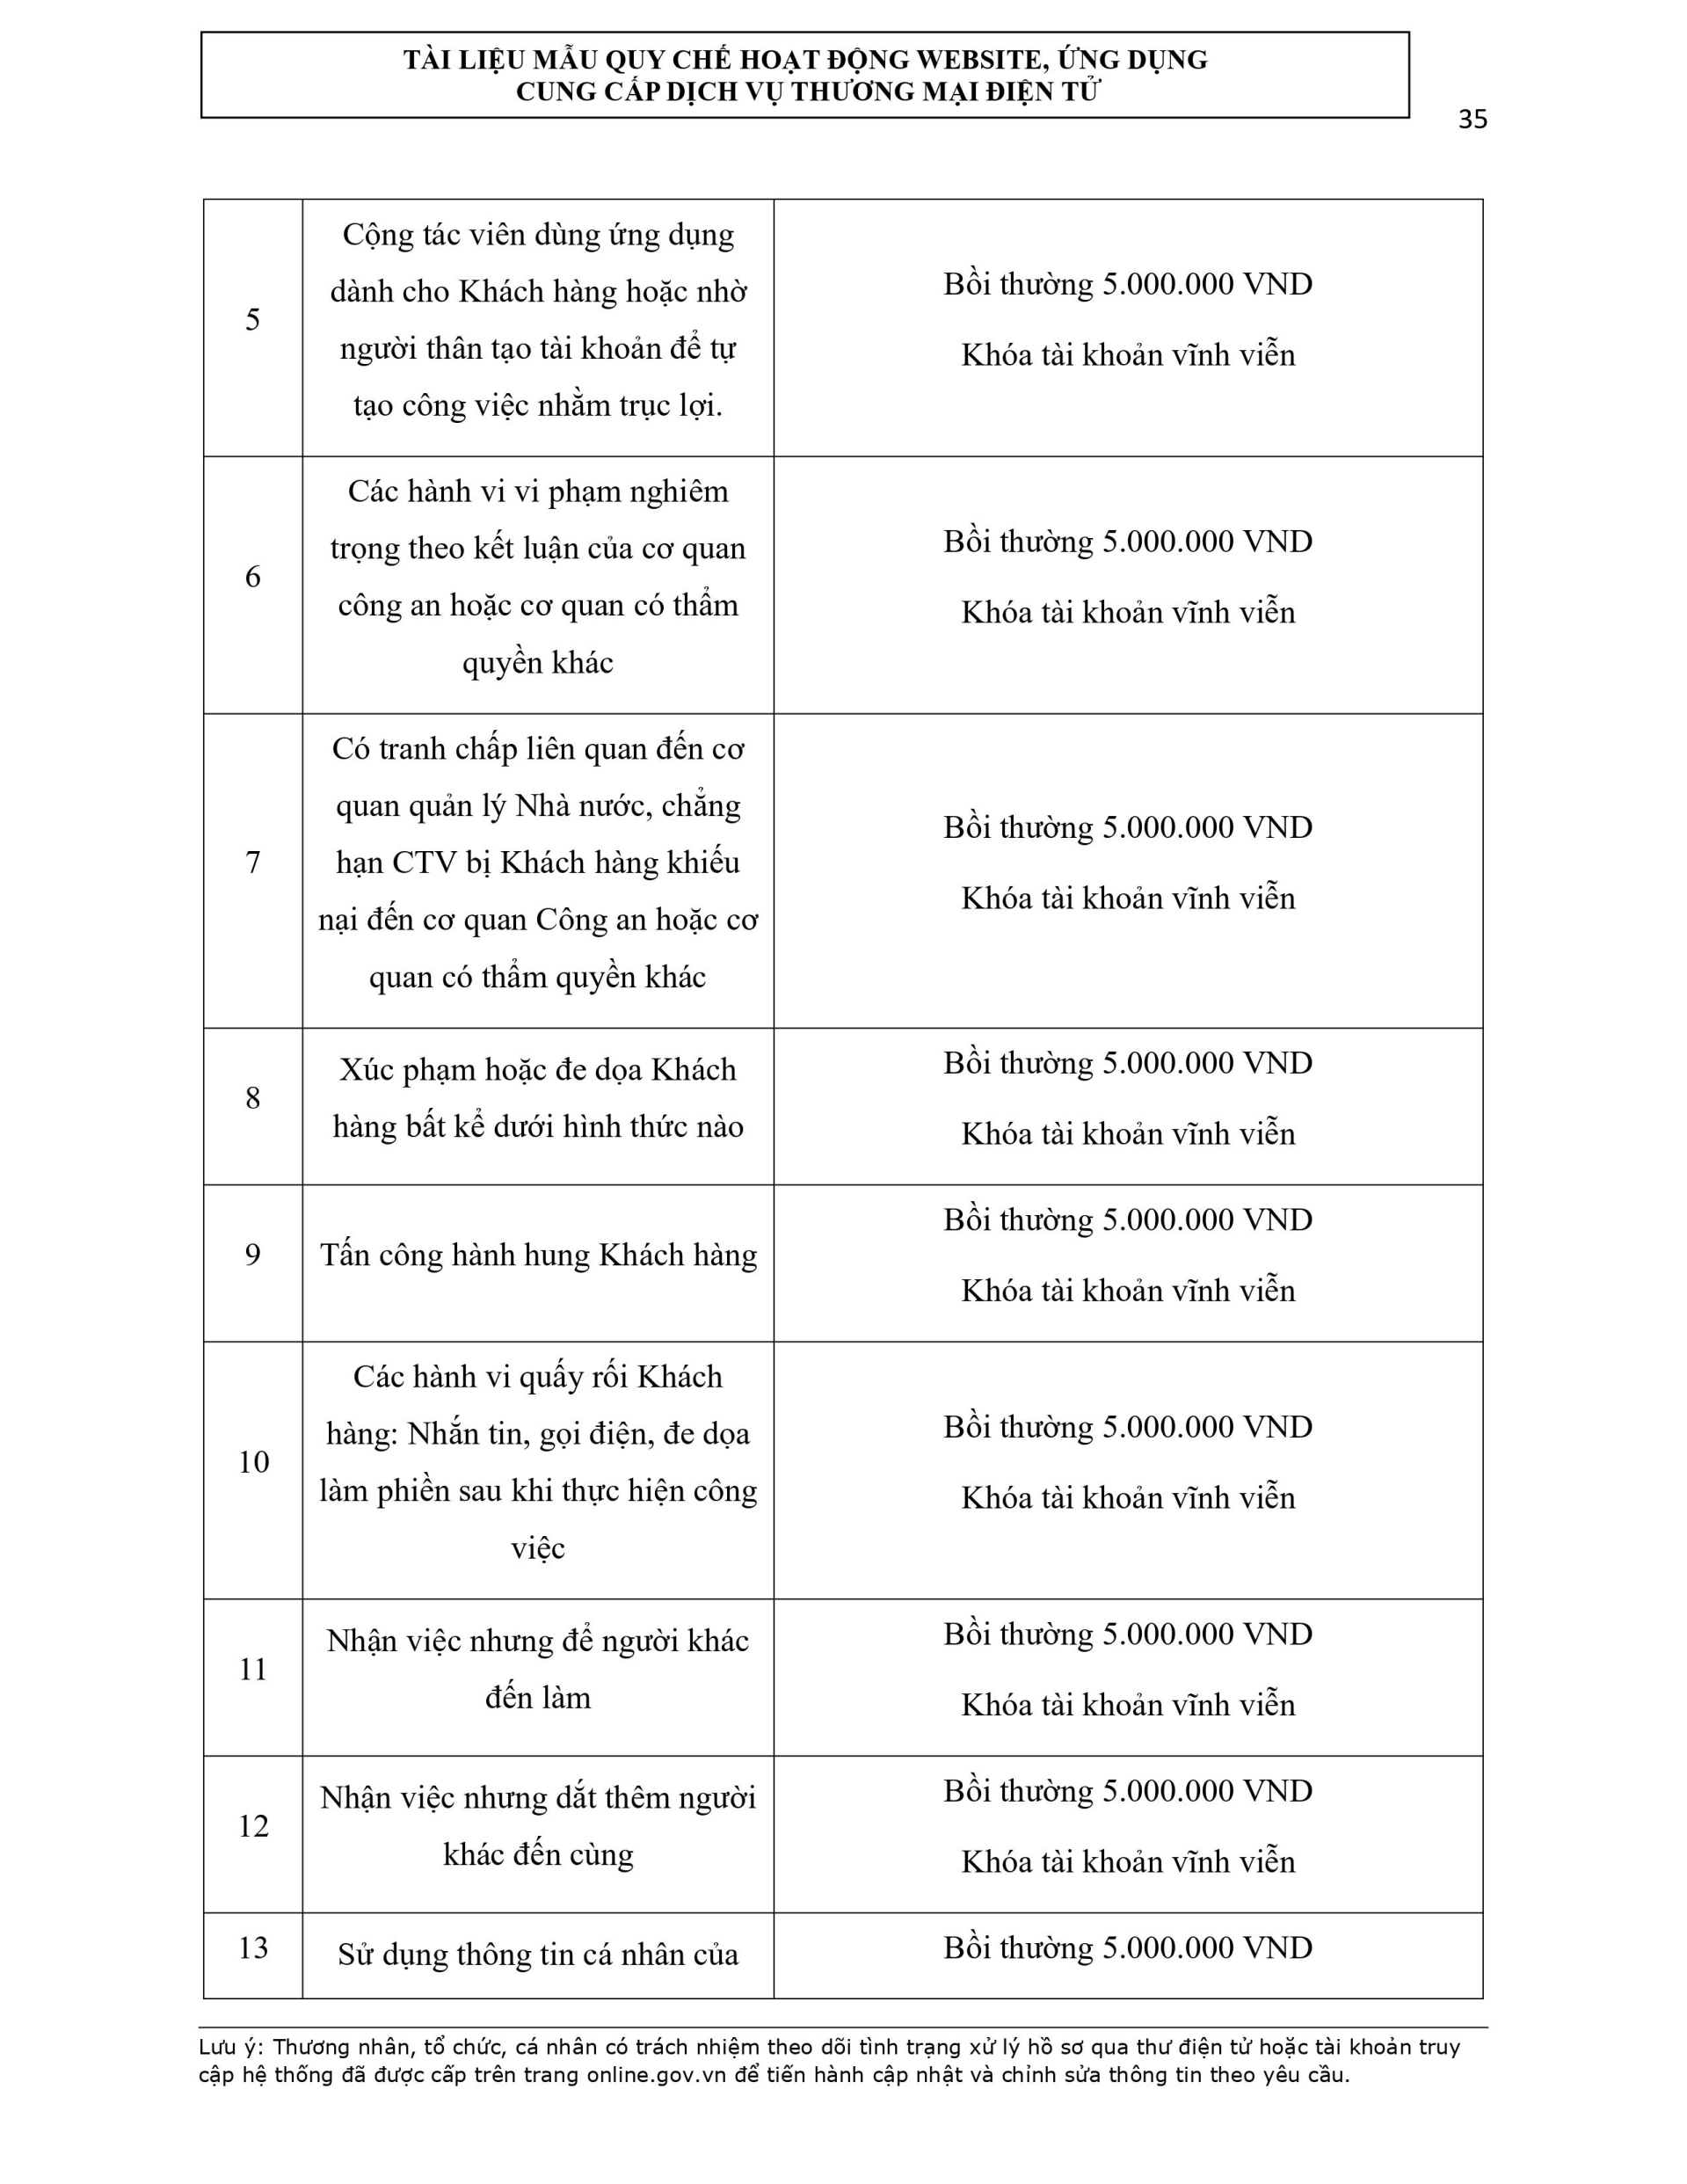 quy-che-hoat-dong-ung-dung-wow-page-0035